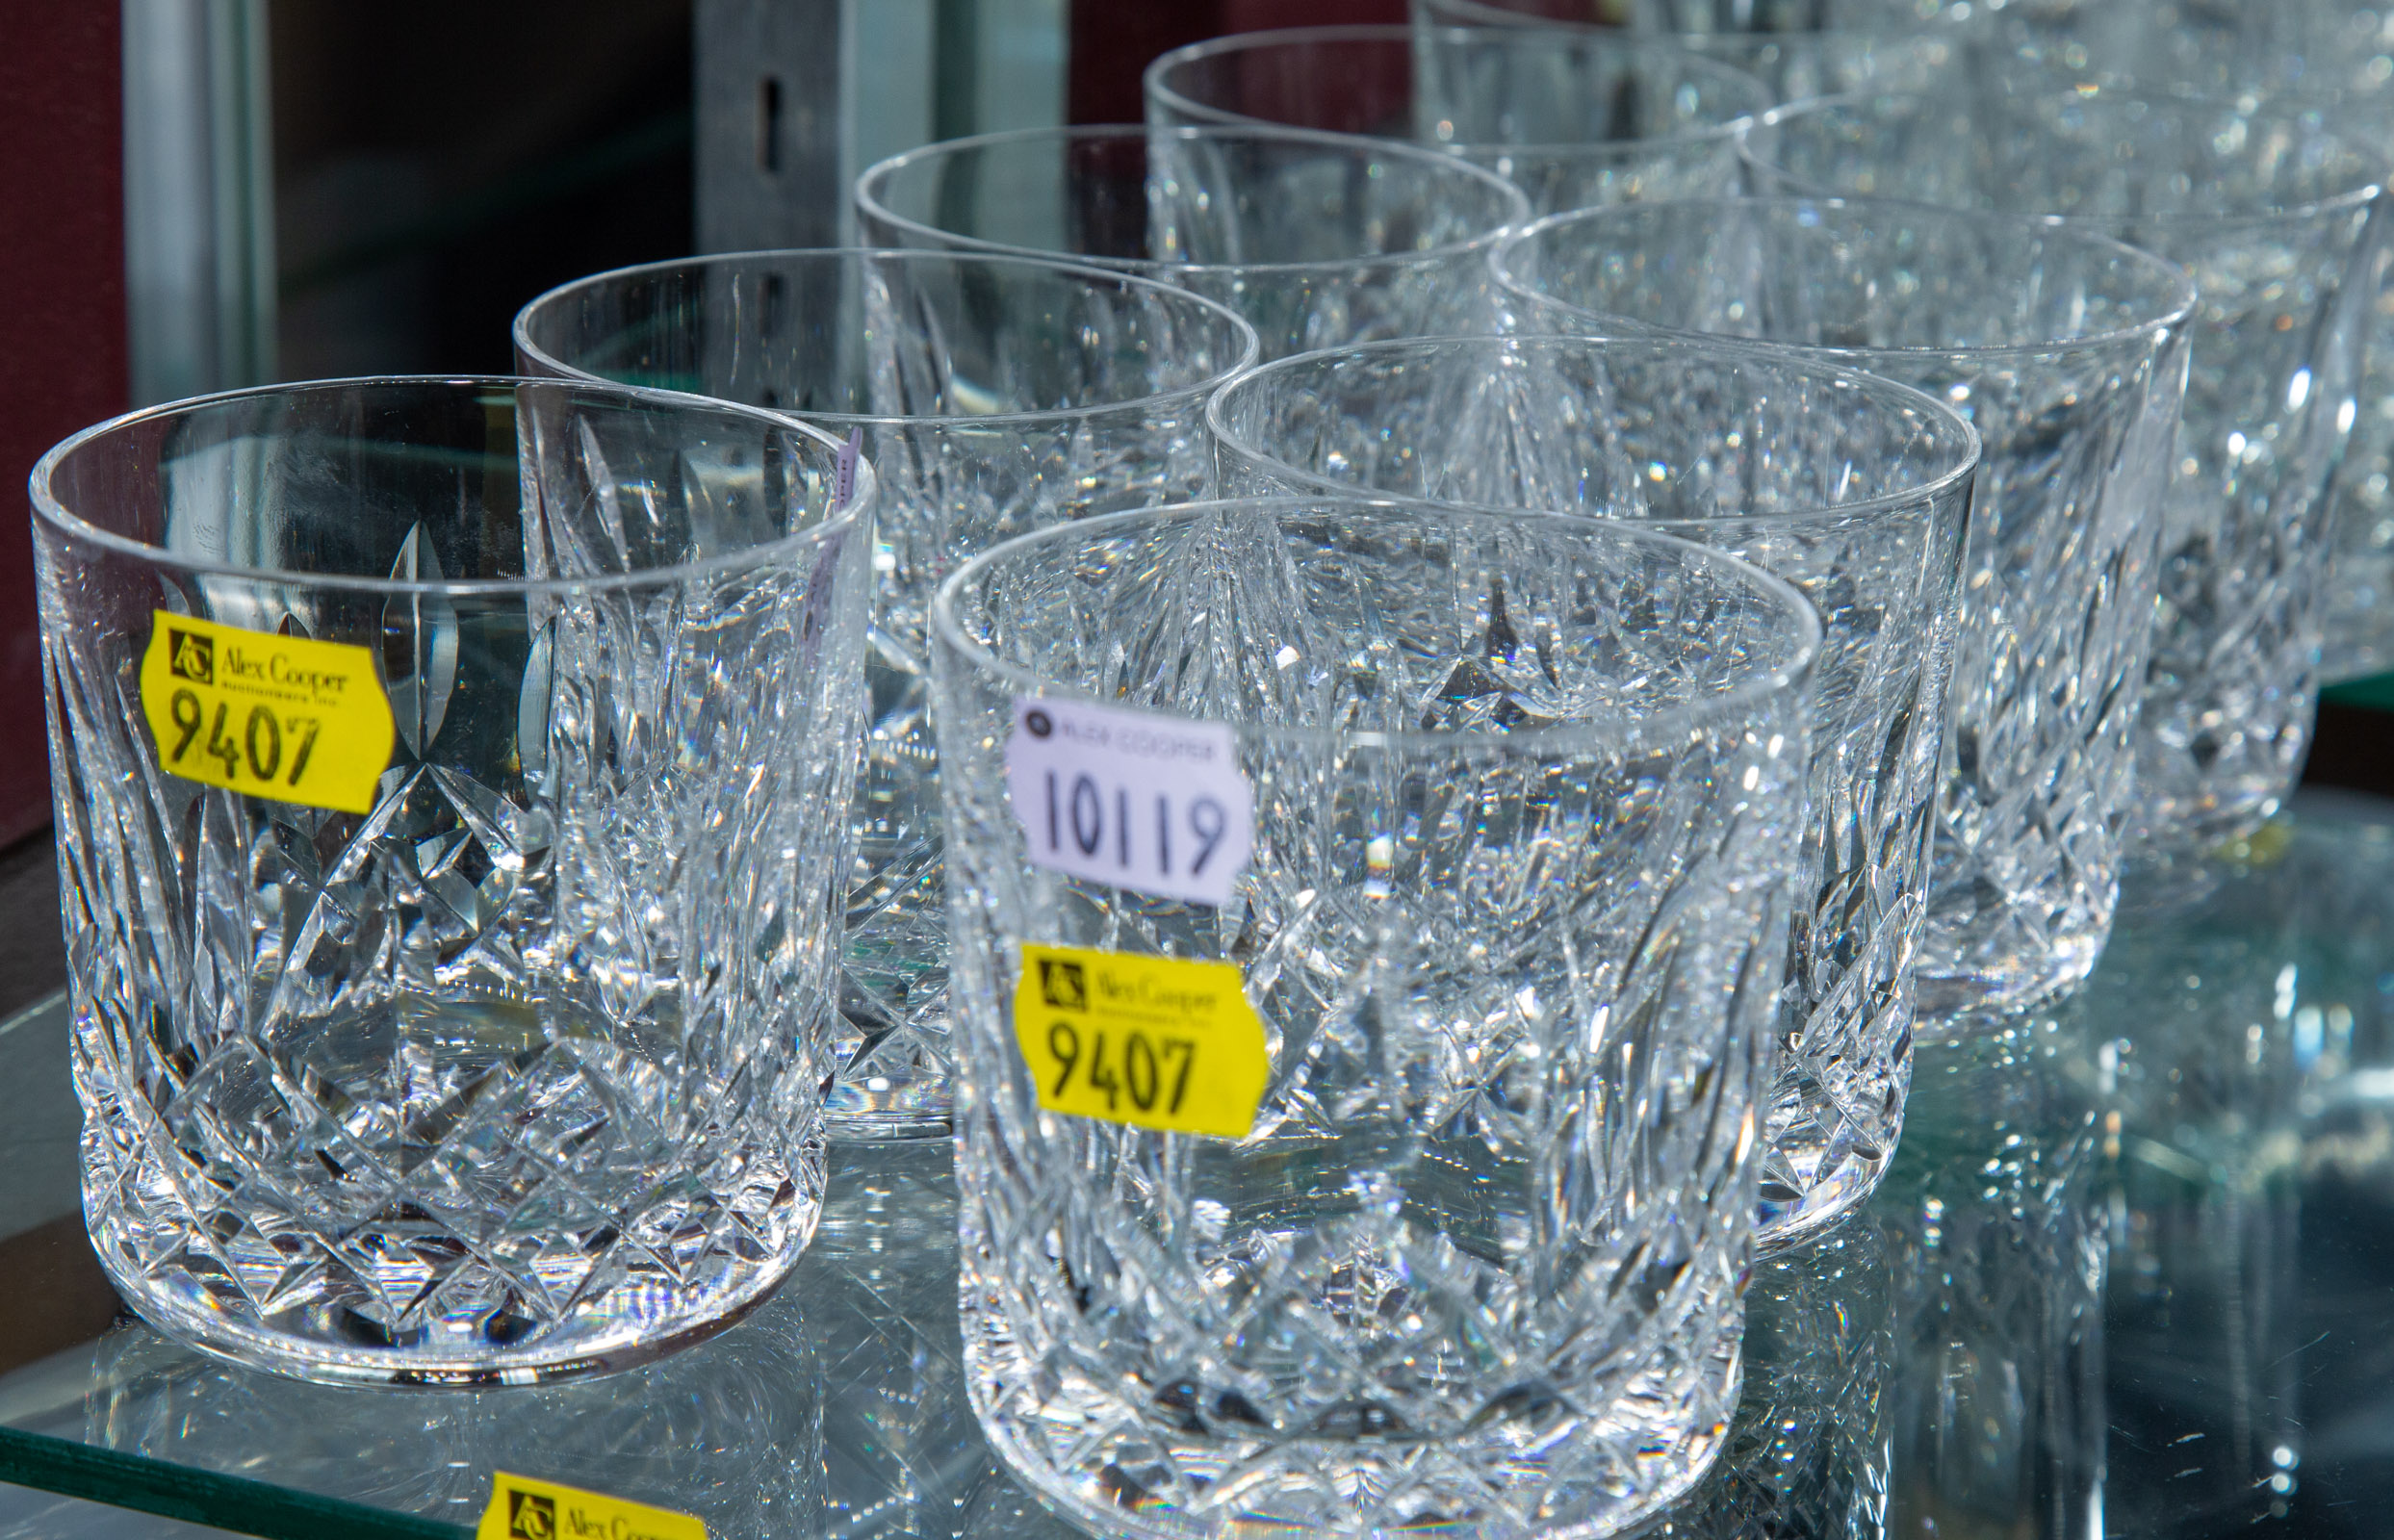 EIGHT WATERFORD "LISMORE" TUMBLERS